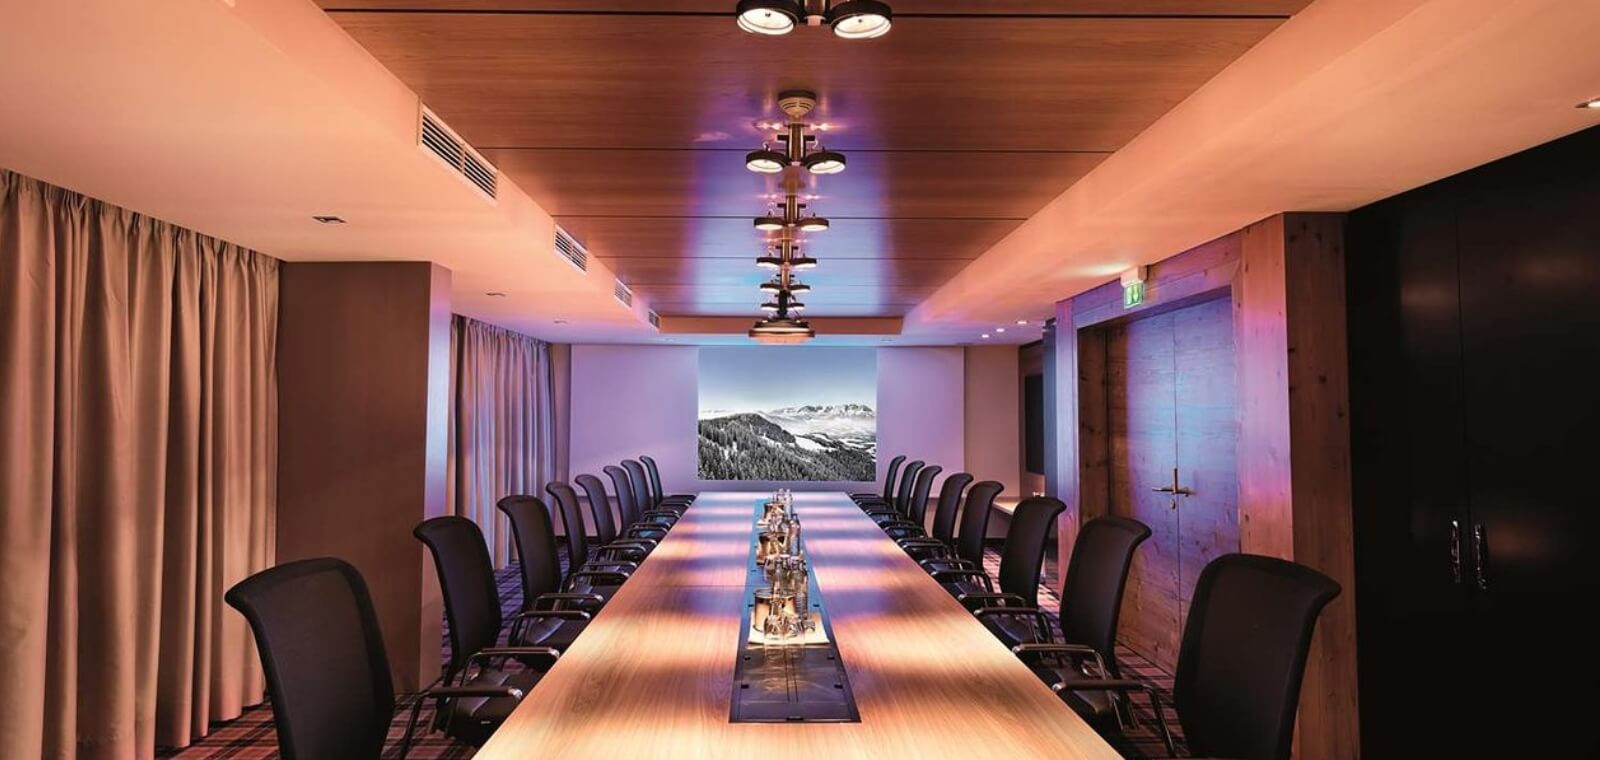 A big but cozy meeting room in cozy light